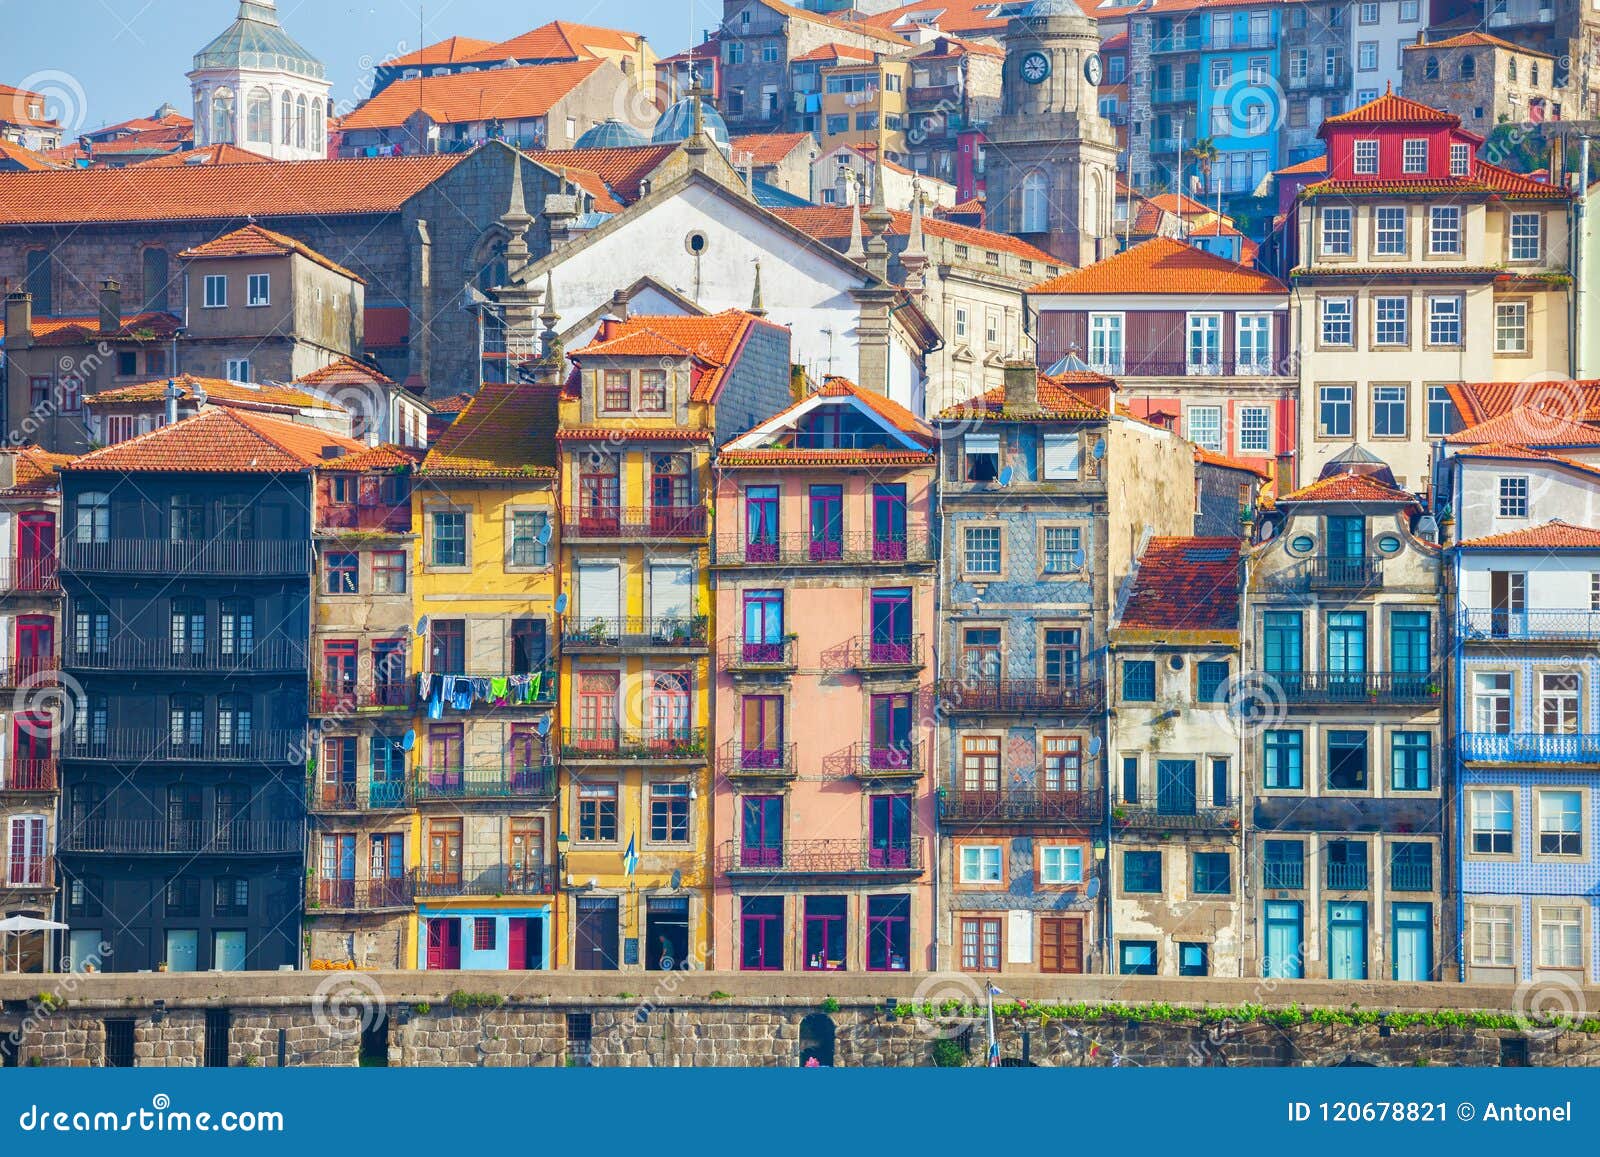 typical old houses with colorful facades at ribeira district, porto, portugal